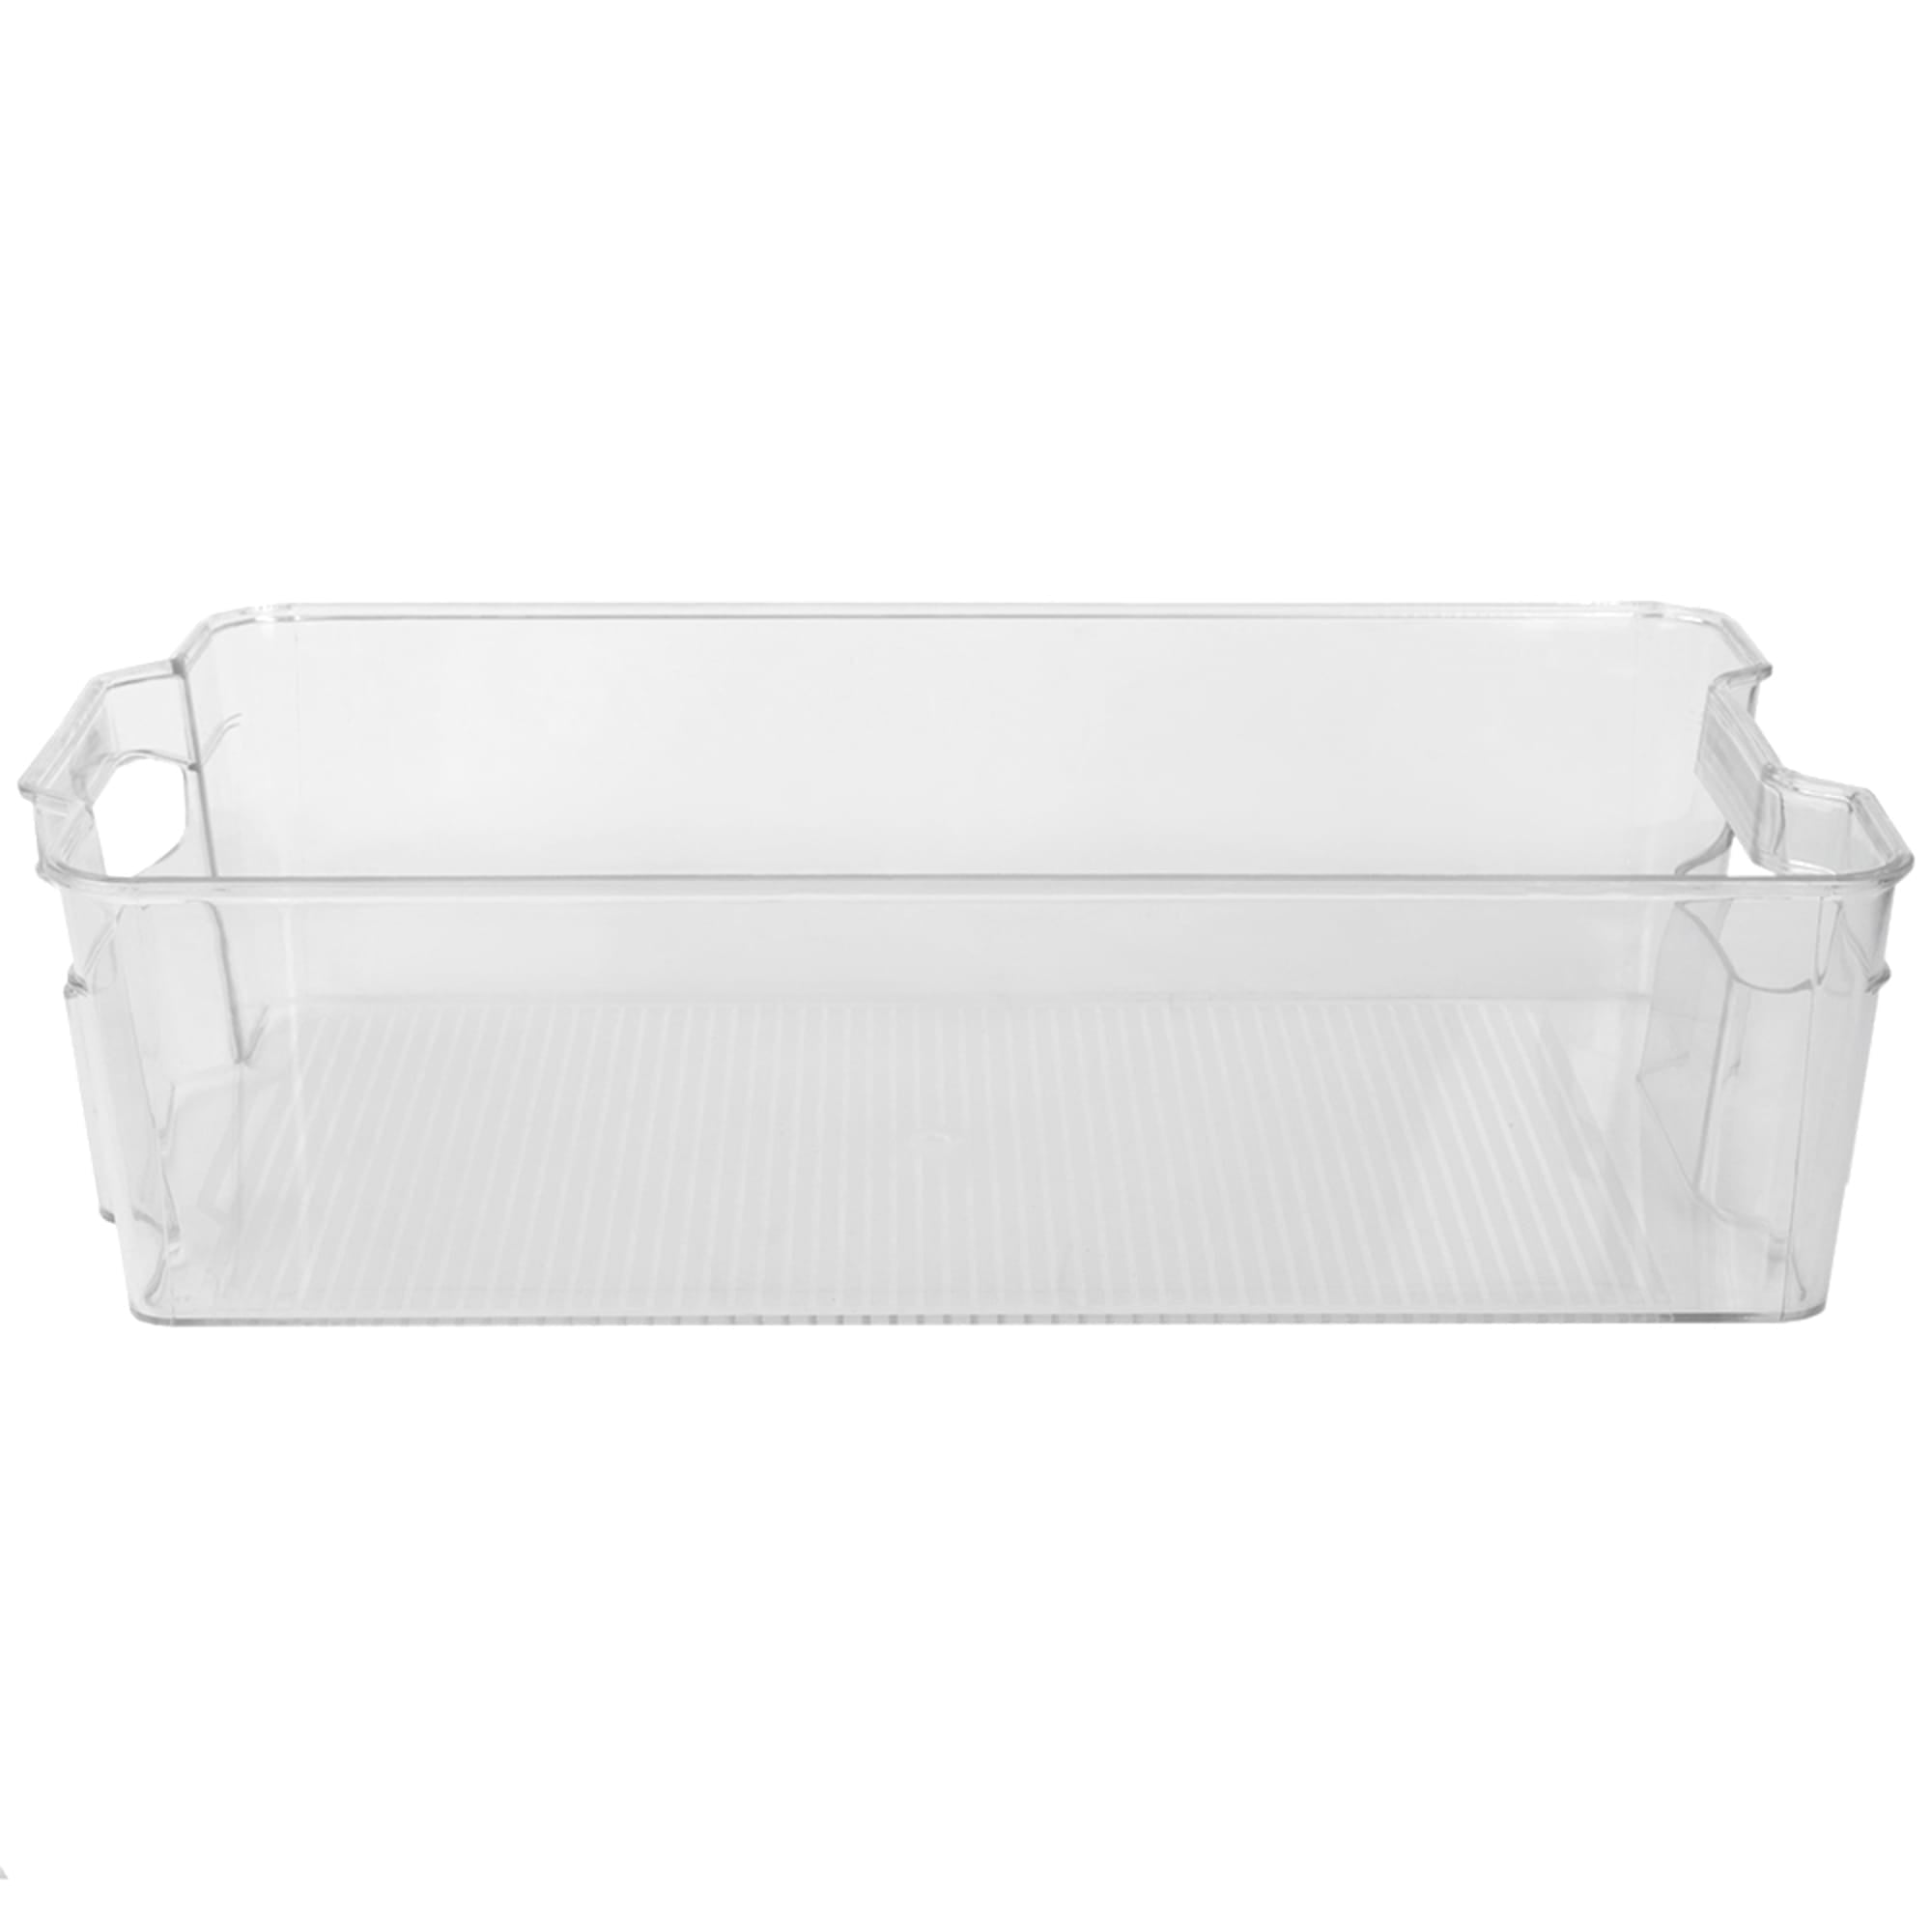 Home Basics X-Large Plastic Fridge Bin with Handle, Clear $5.00 EACH, CASE PACK OF 12